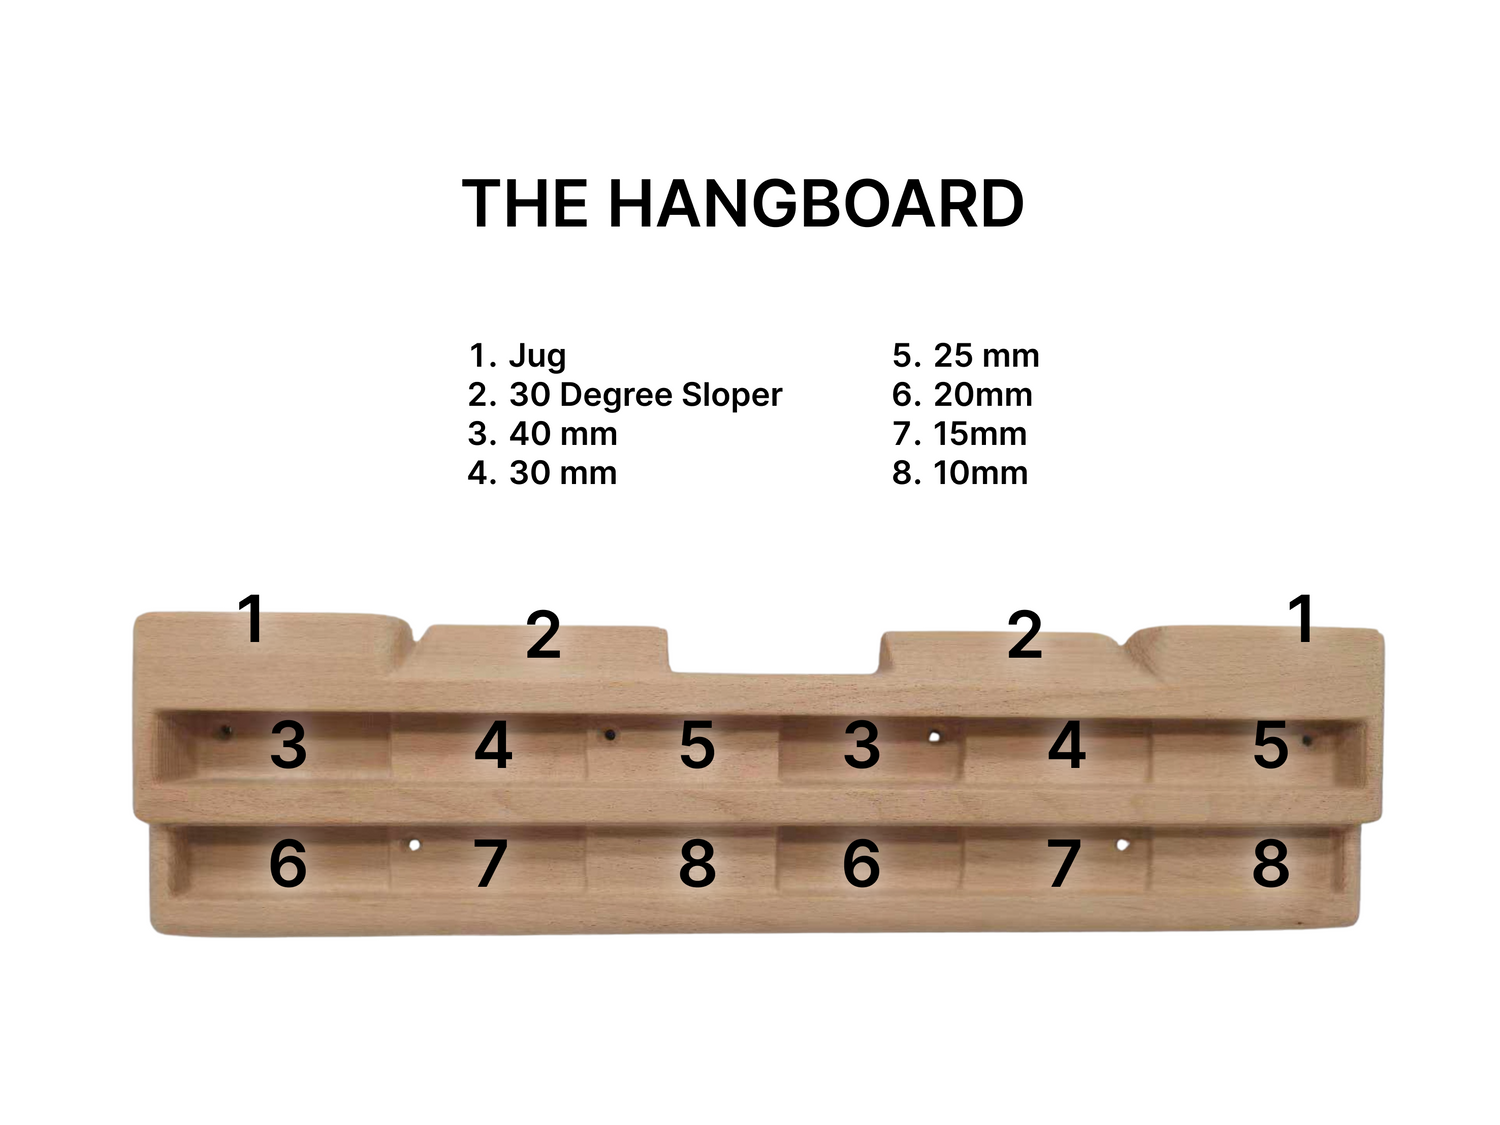 The Hangboard labeled layout for edge depths, jugs and sloper.